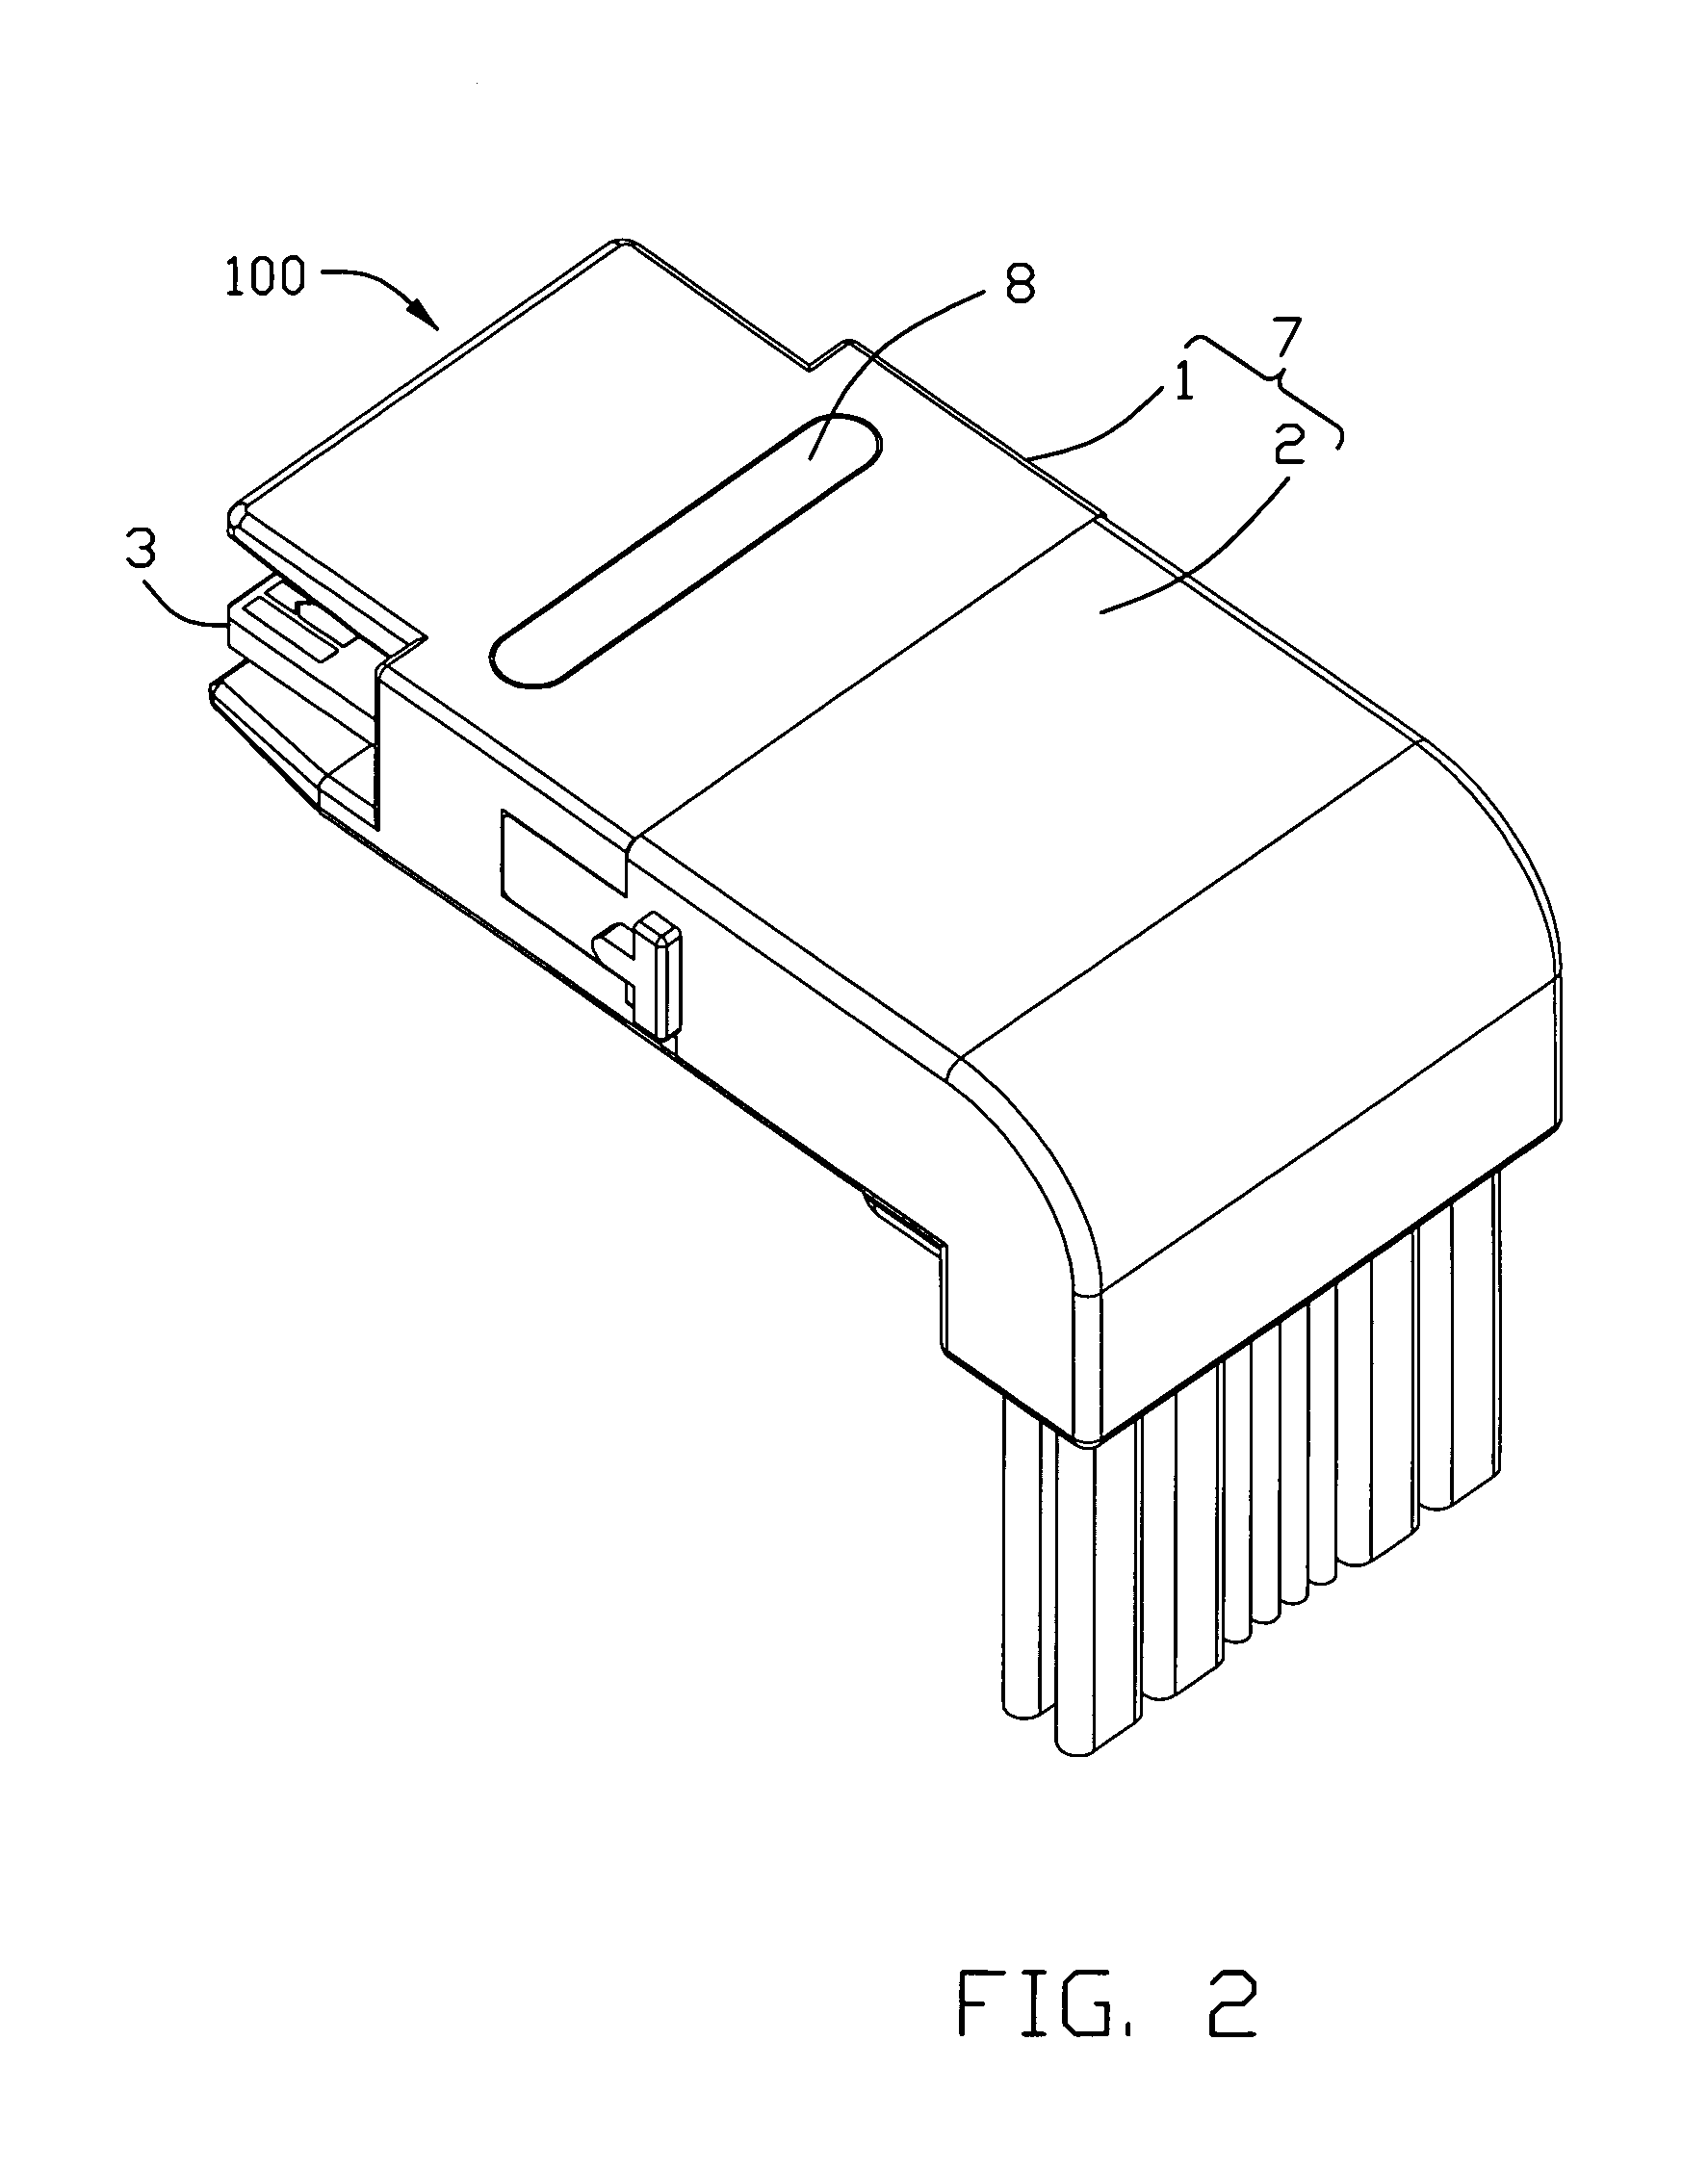 Plug connector with improved cable arrangement and having retaining arrangement securely retaining mating substrate therein